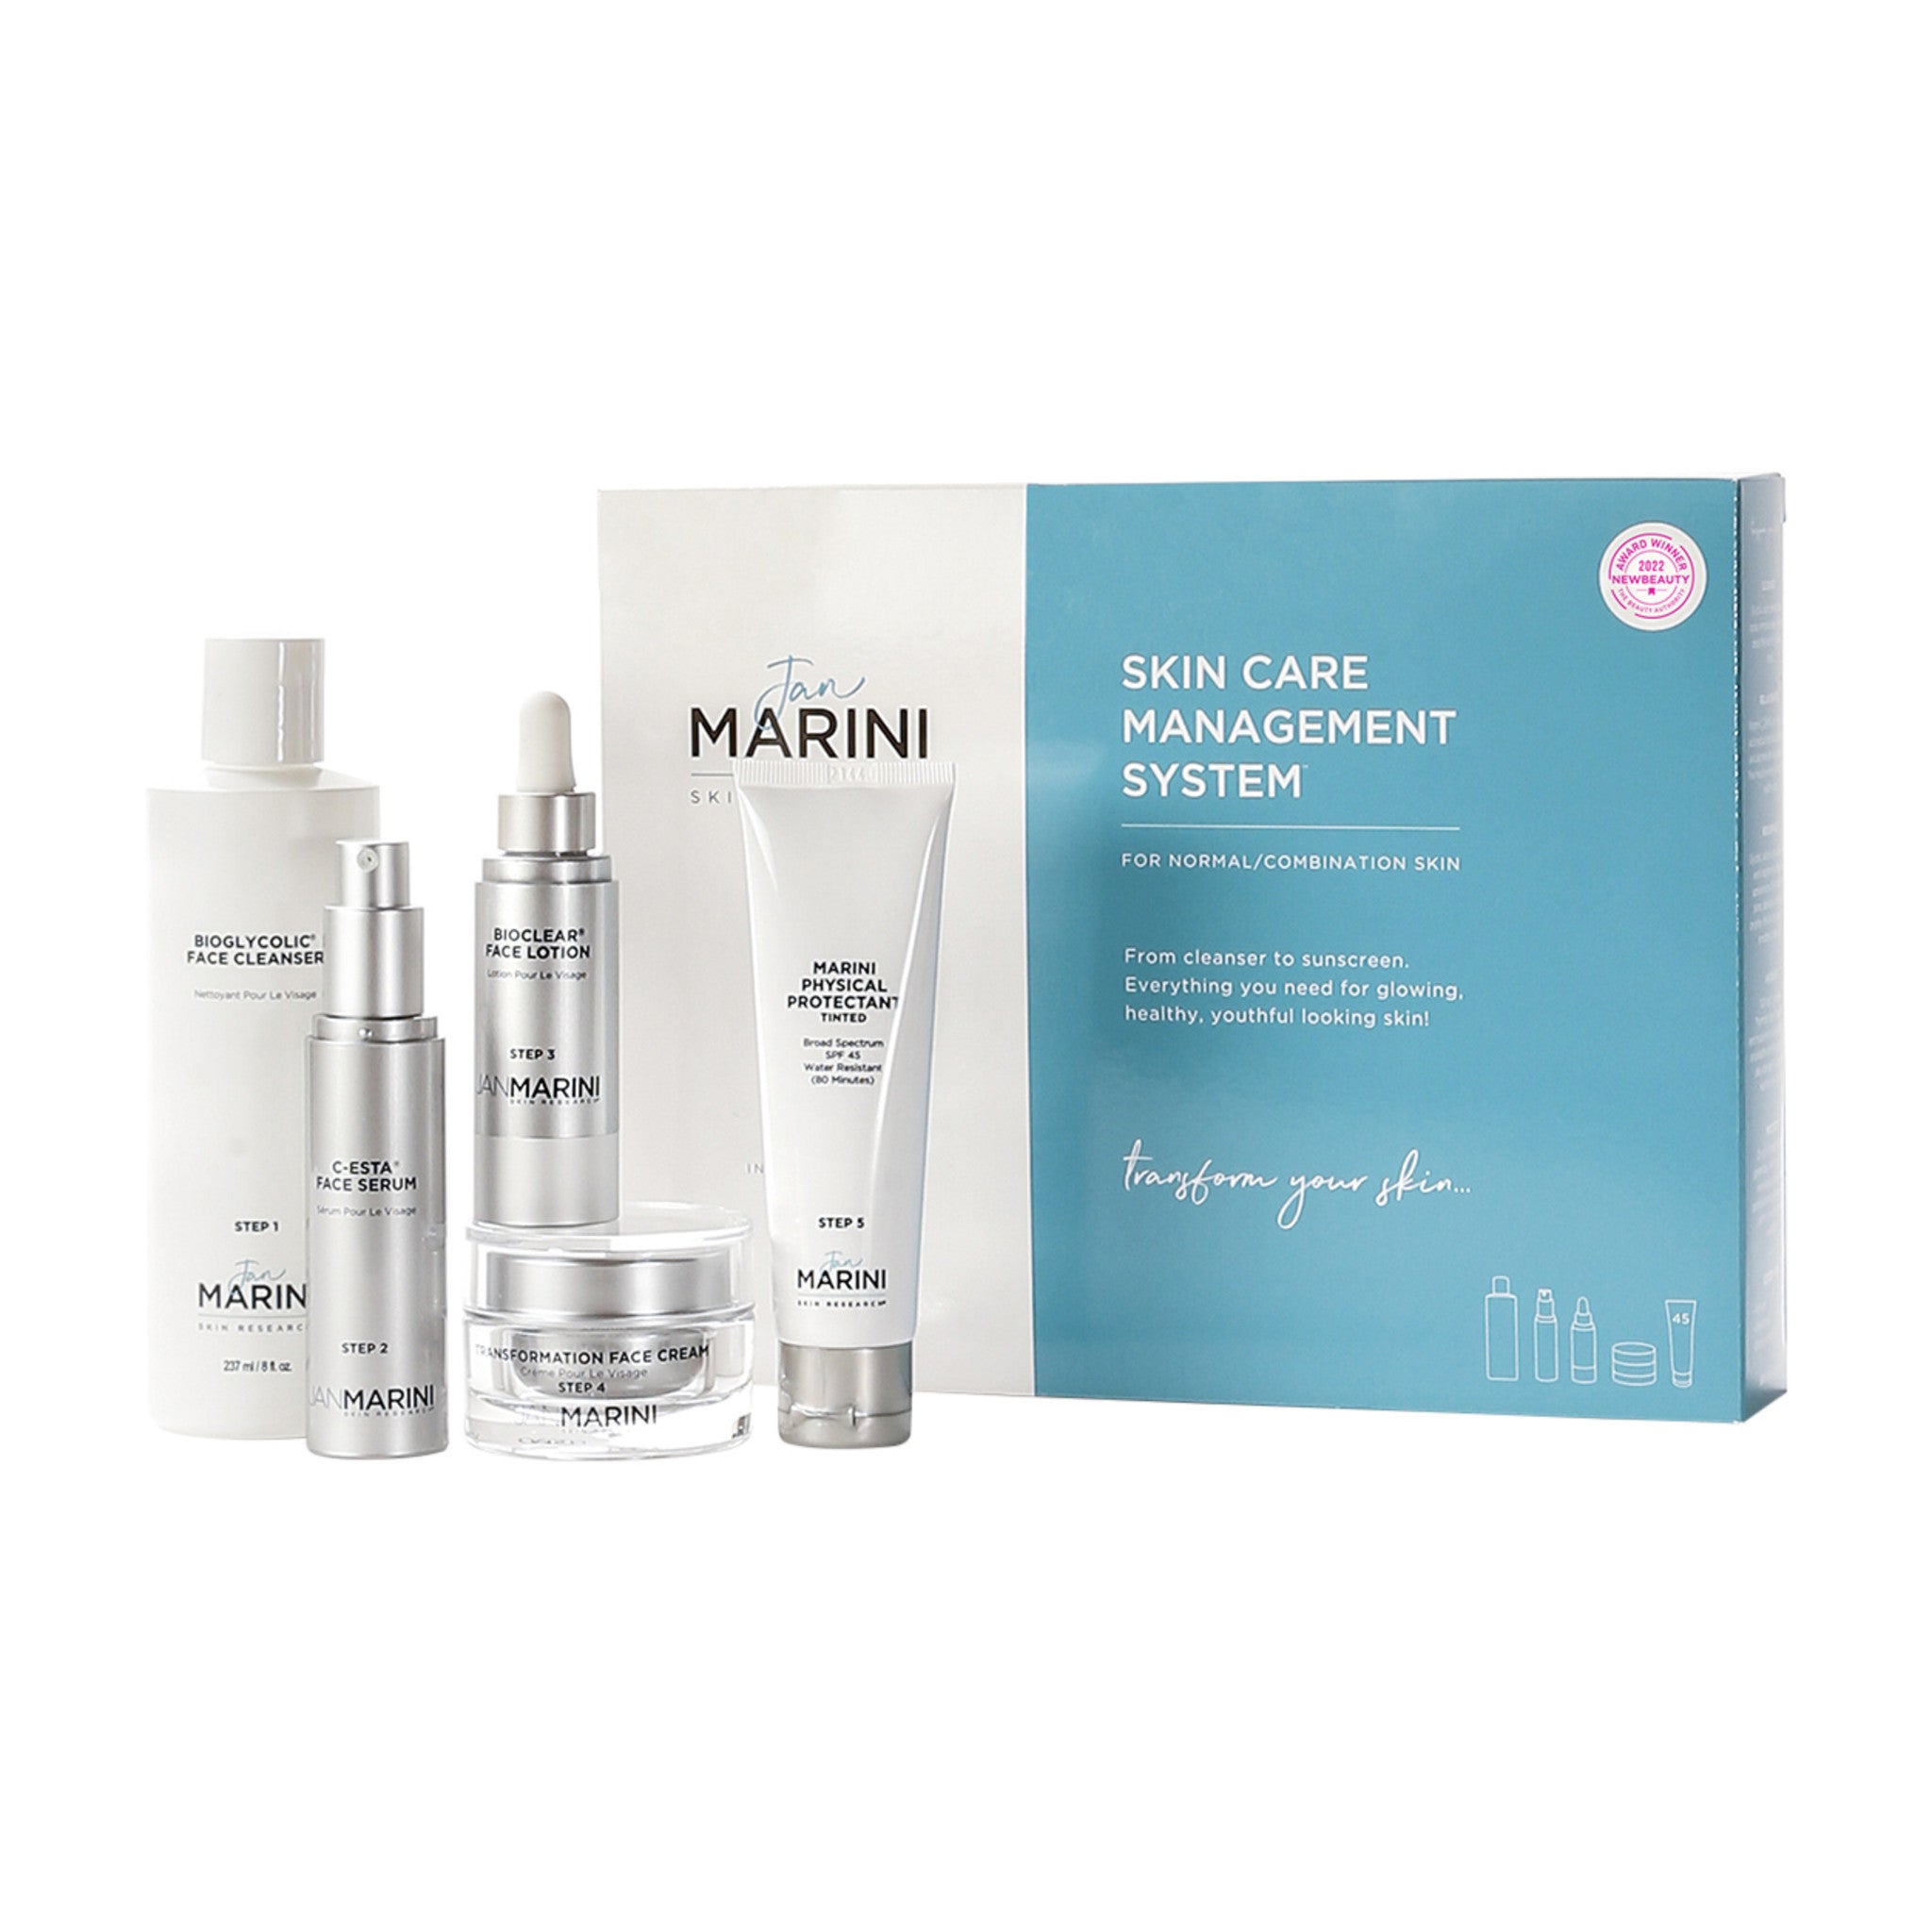 Jan Marini Skin Care Management System Normal or Combination Skin with Marini Physical Protectant SPF 45 Size variant: main image.